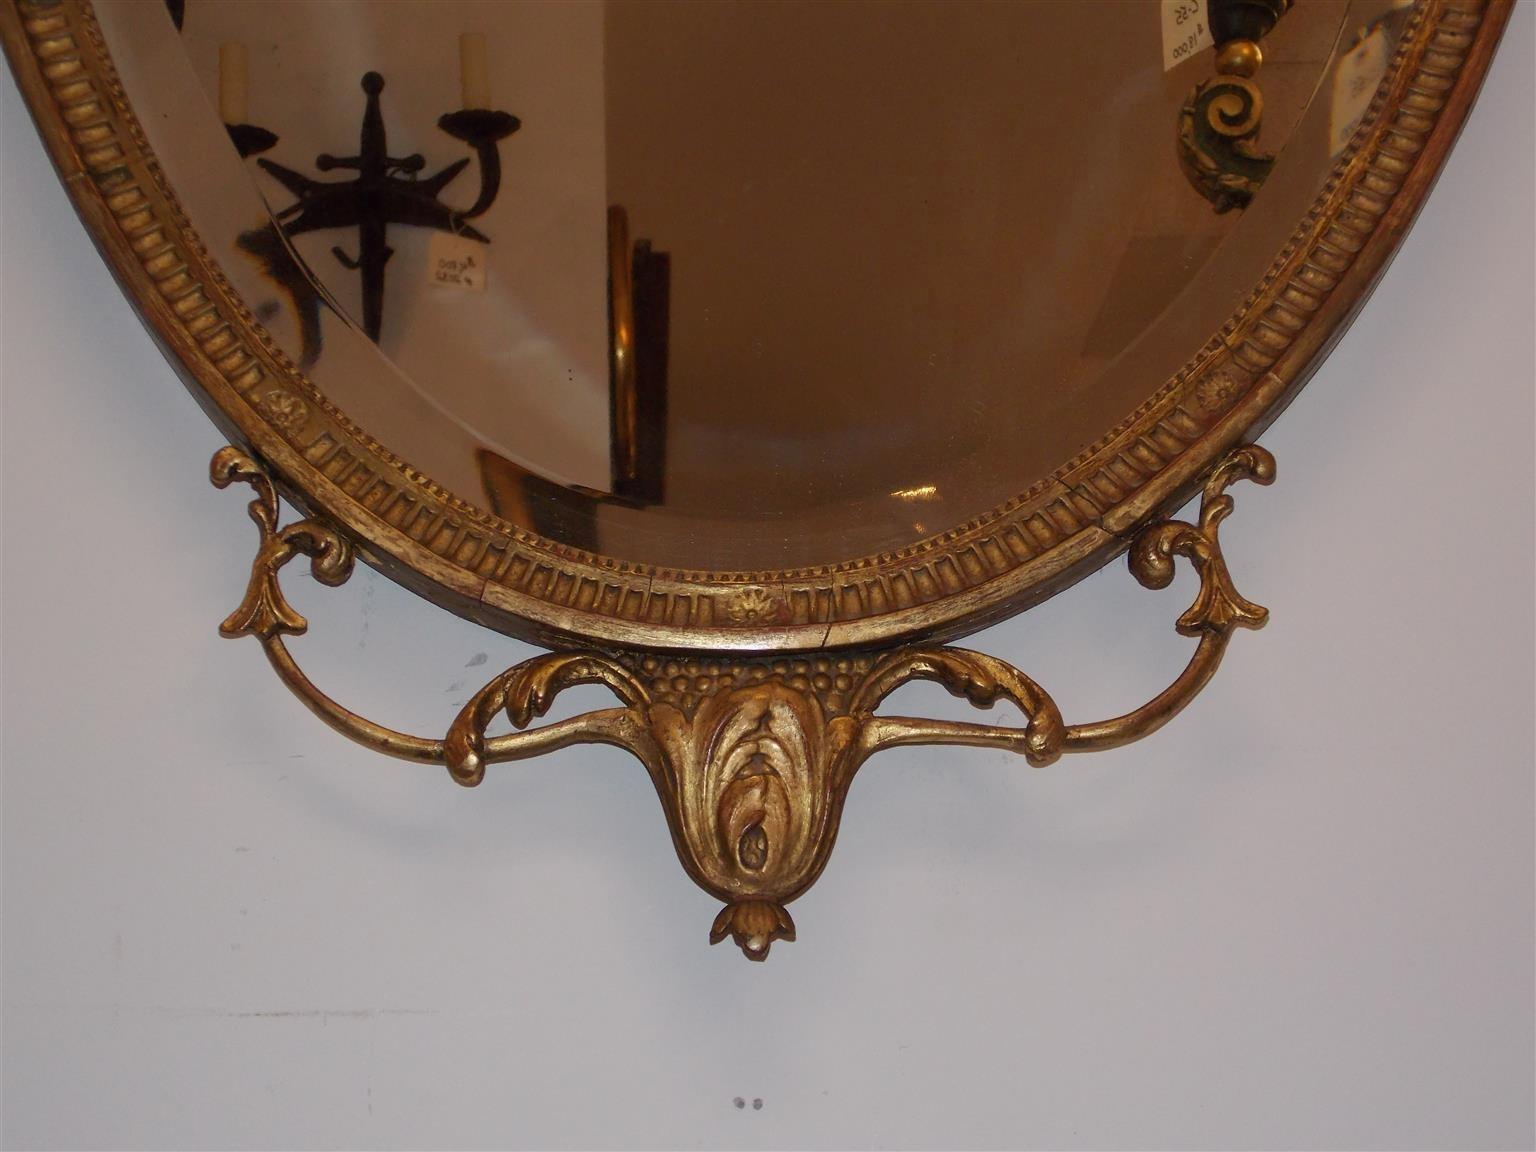 Pair of English Adam Oval Urn & Bell Flower Mirrors with Beveled Glass, C. 1800 For Sale 6